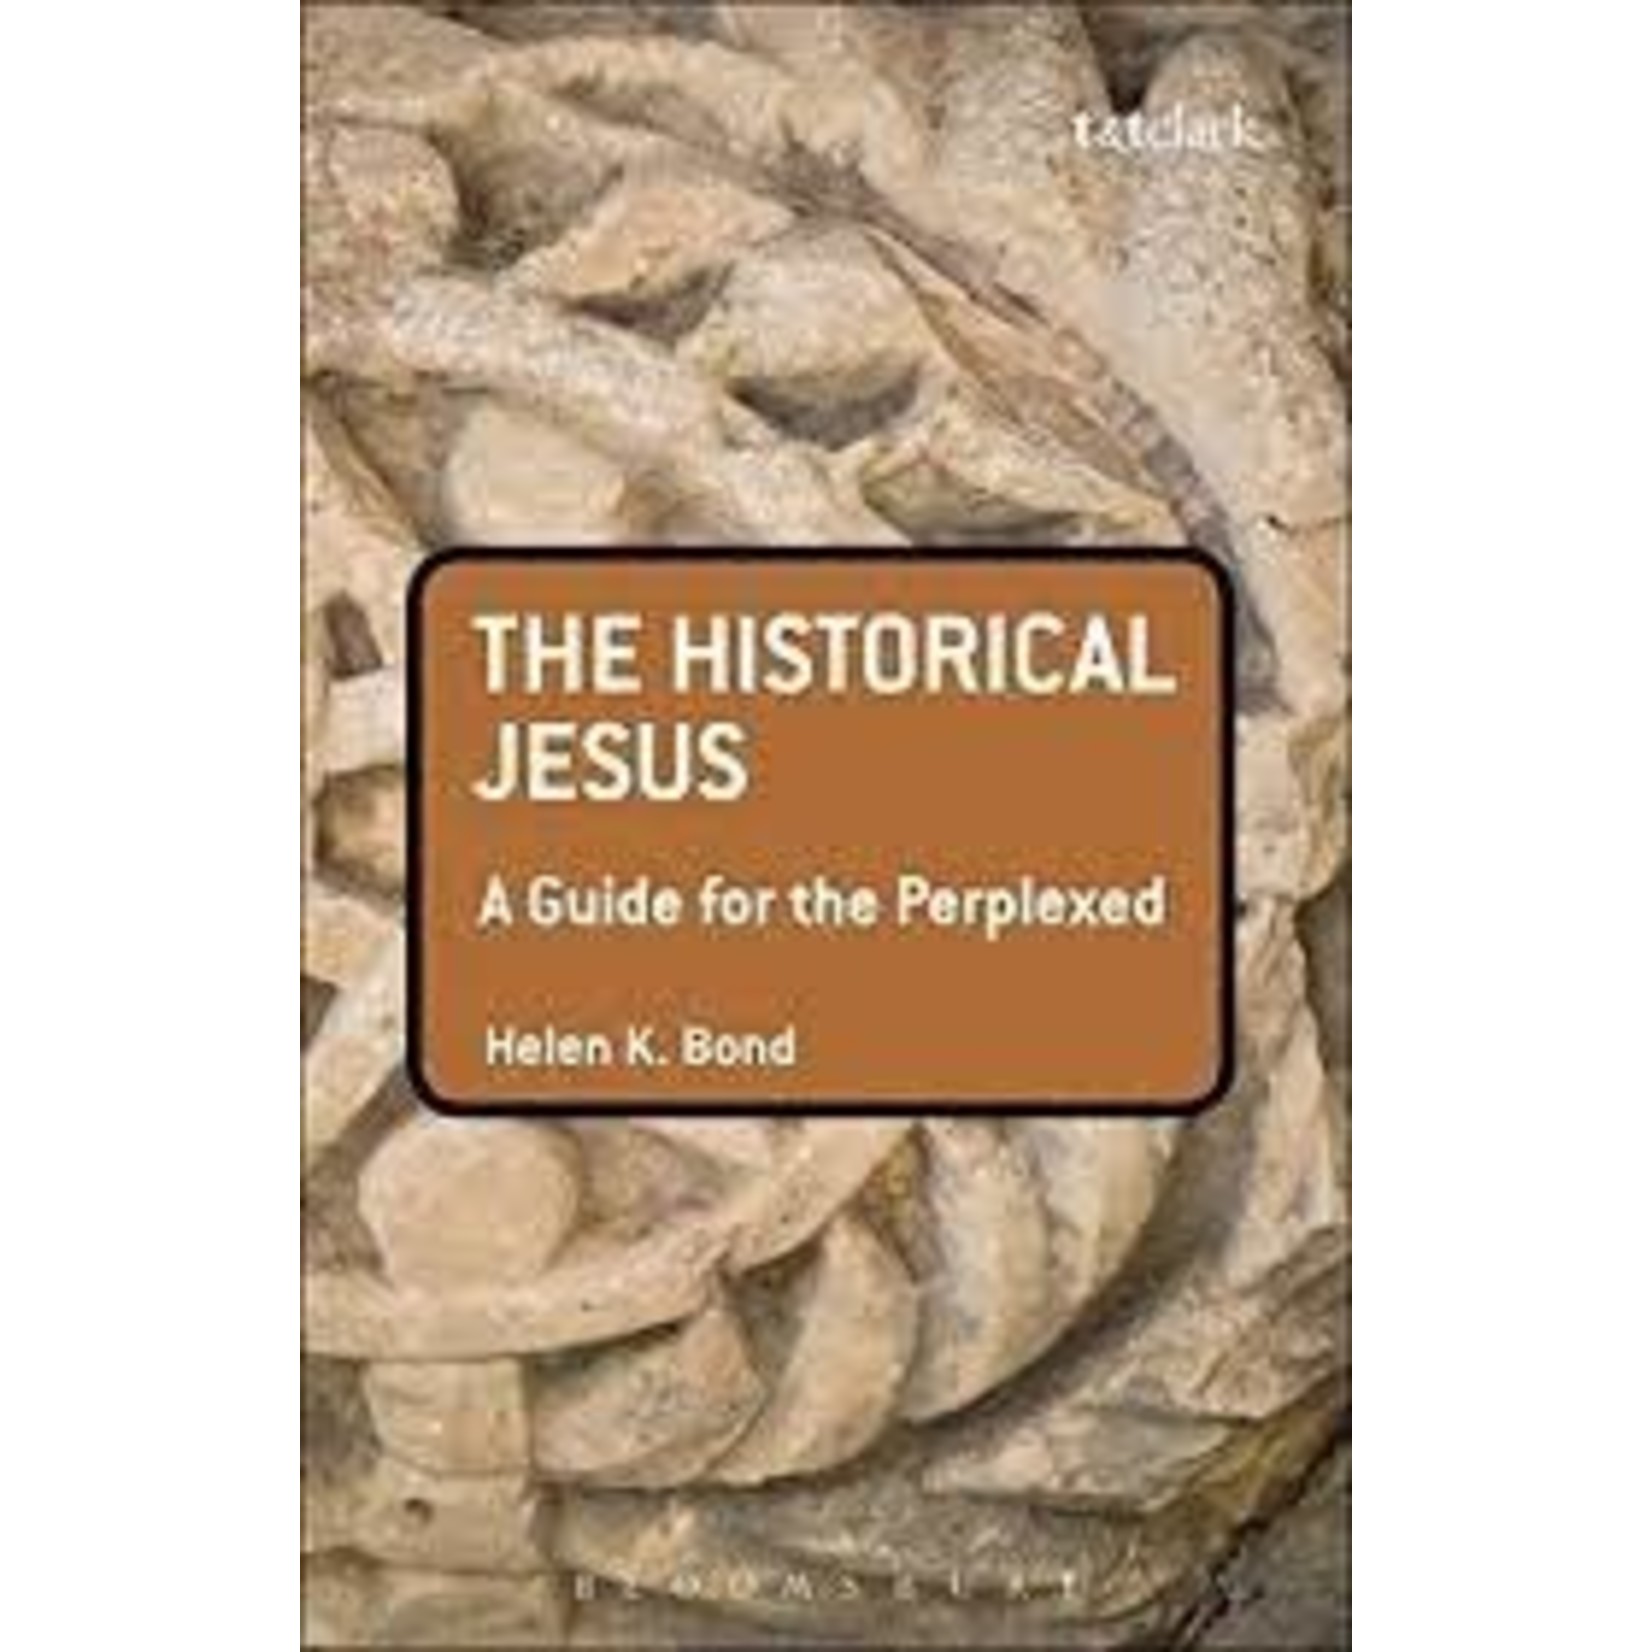 The Historical Jesus: A Guide for the Perplexed